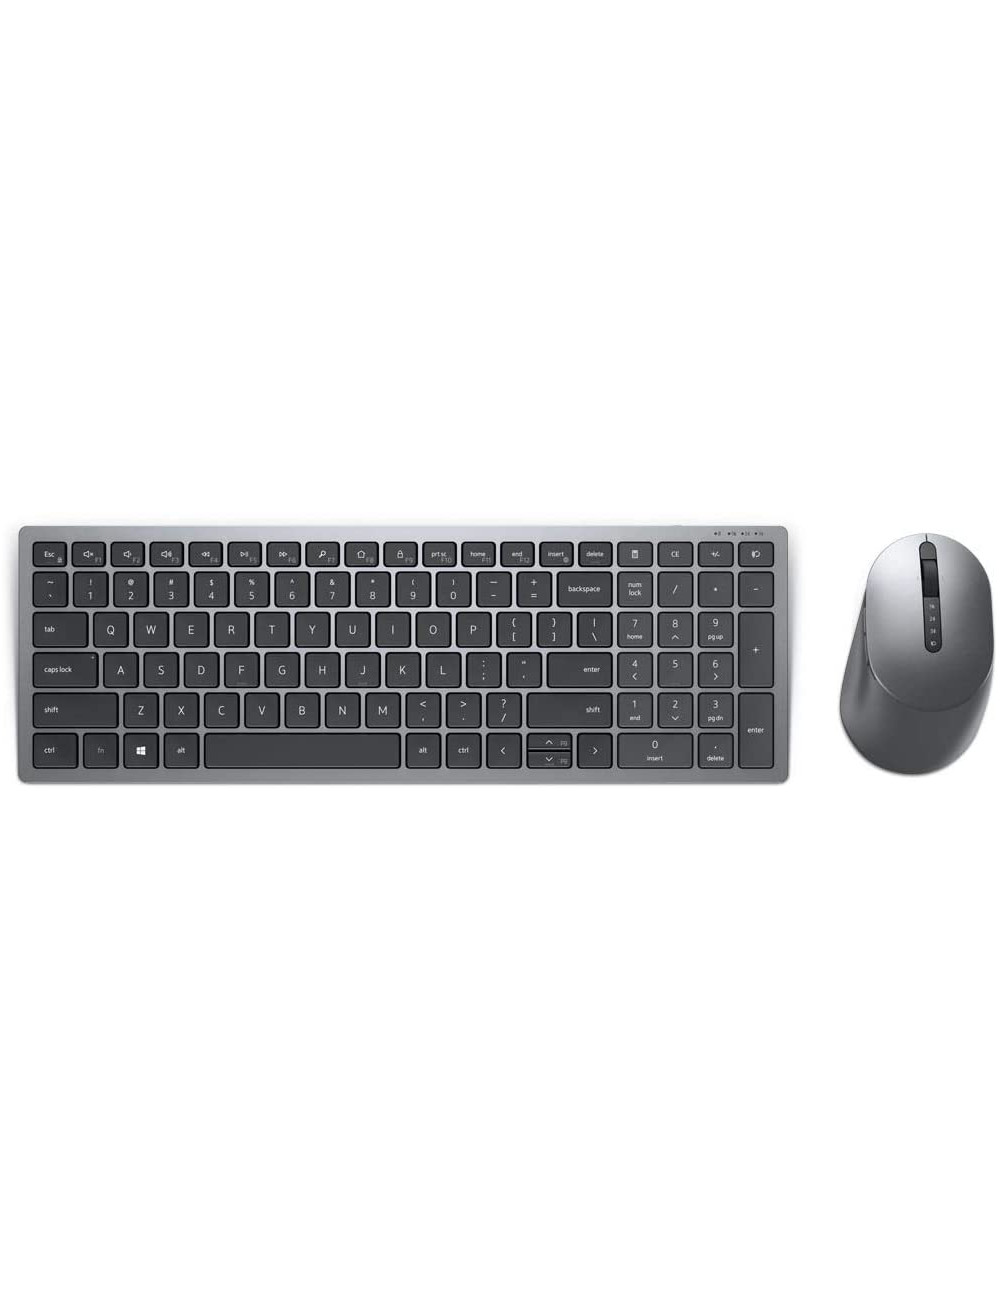 Dell Keyboard and Mouse KM7120W Keyboard and Mouse Set Wireless Batteries included EN/LT Wireless connection Titan Gray Bluetoot